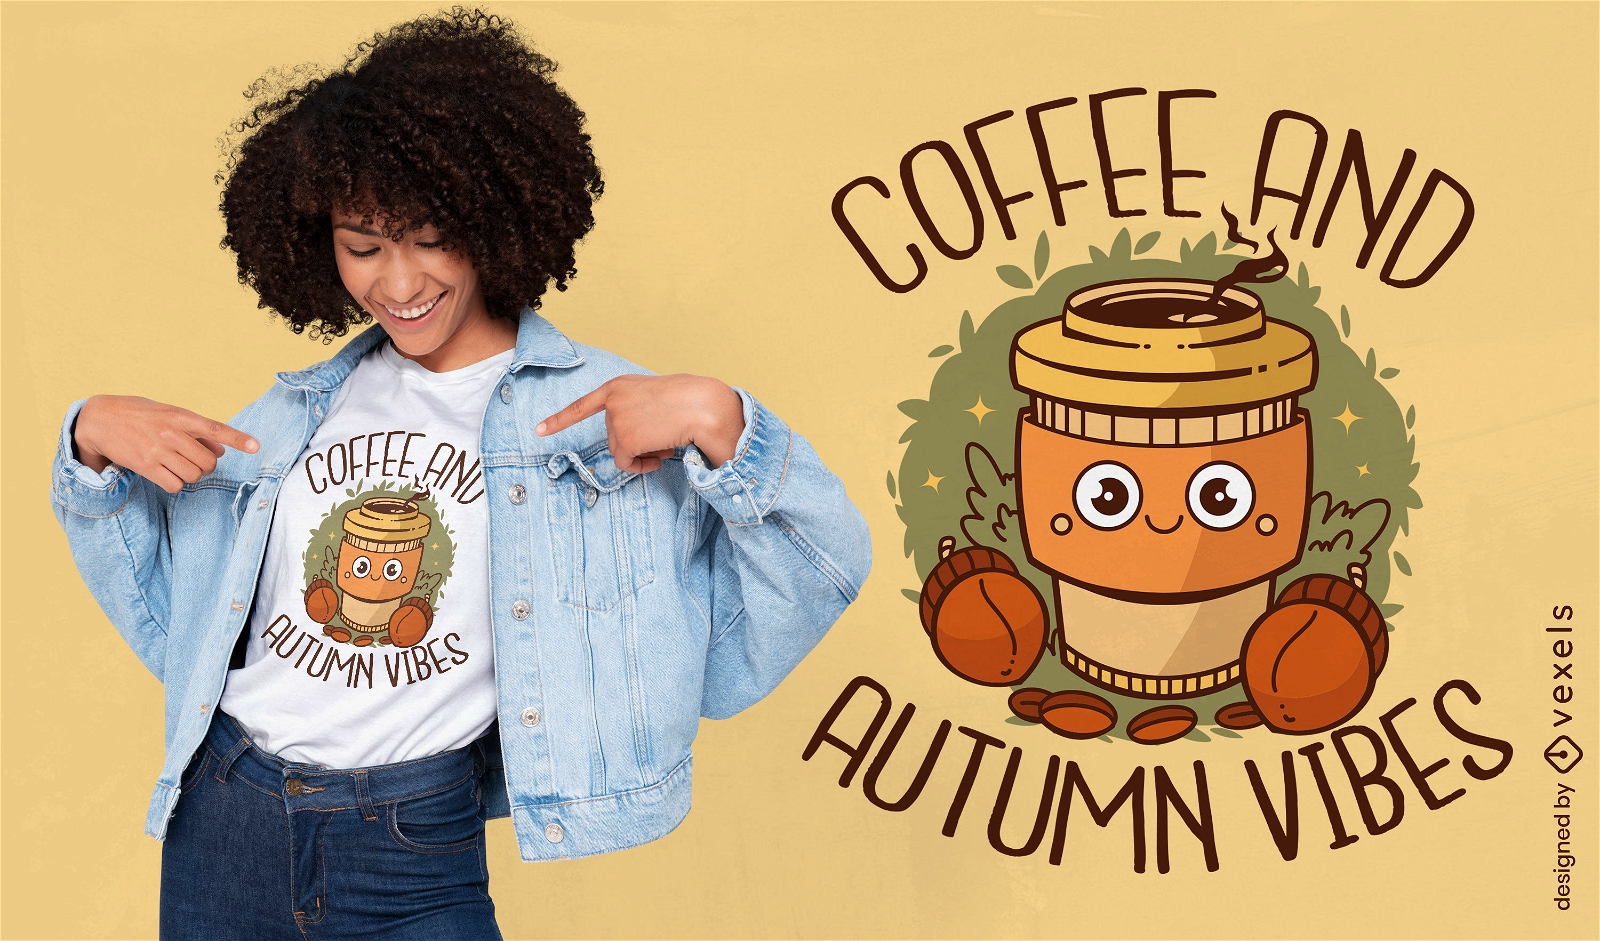 Coffee and autumn vibes t-shirt design